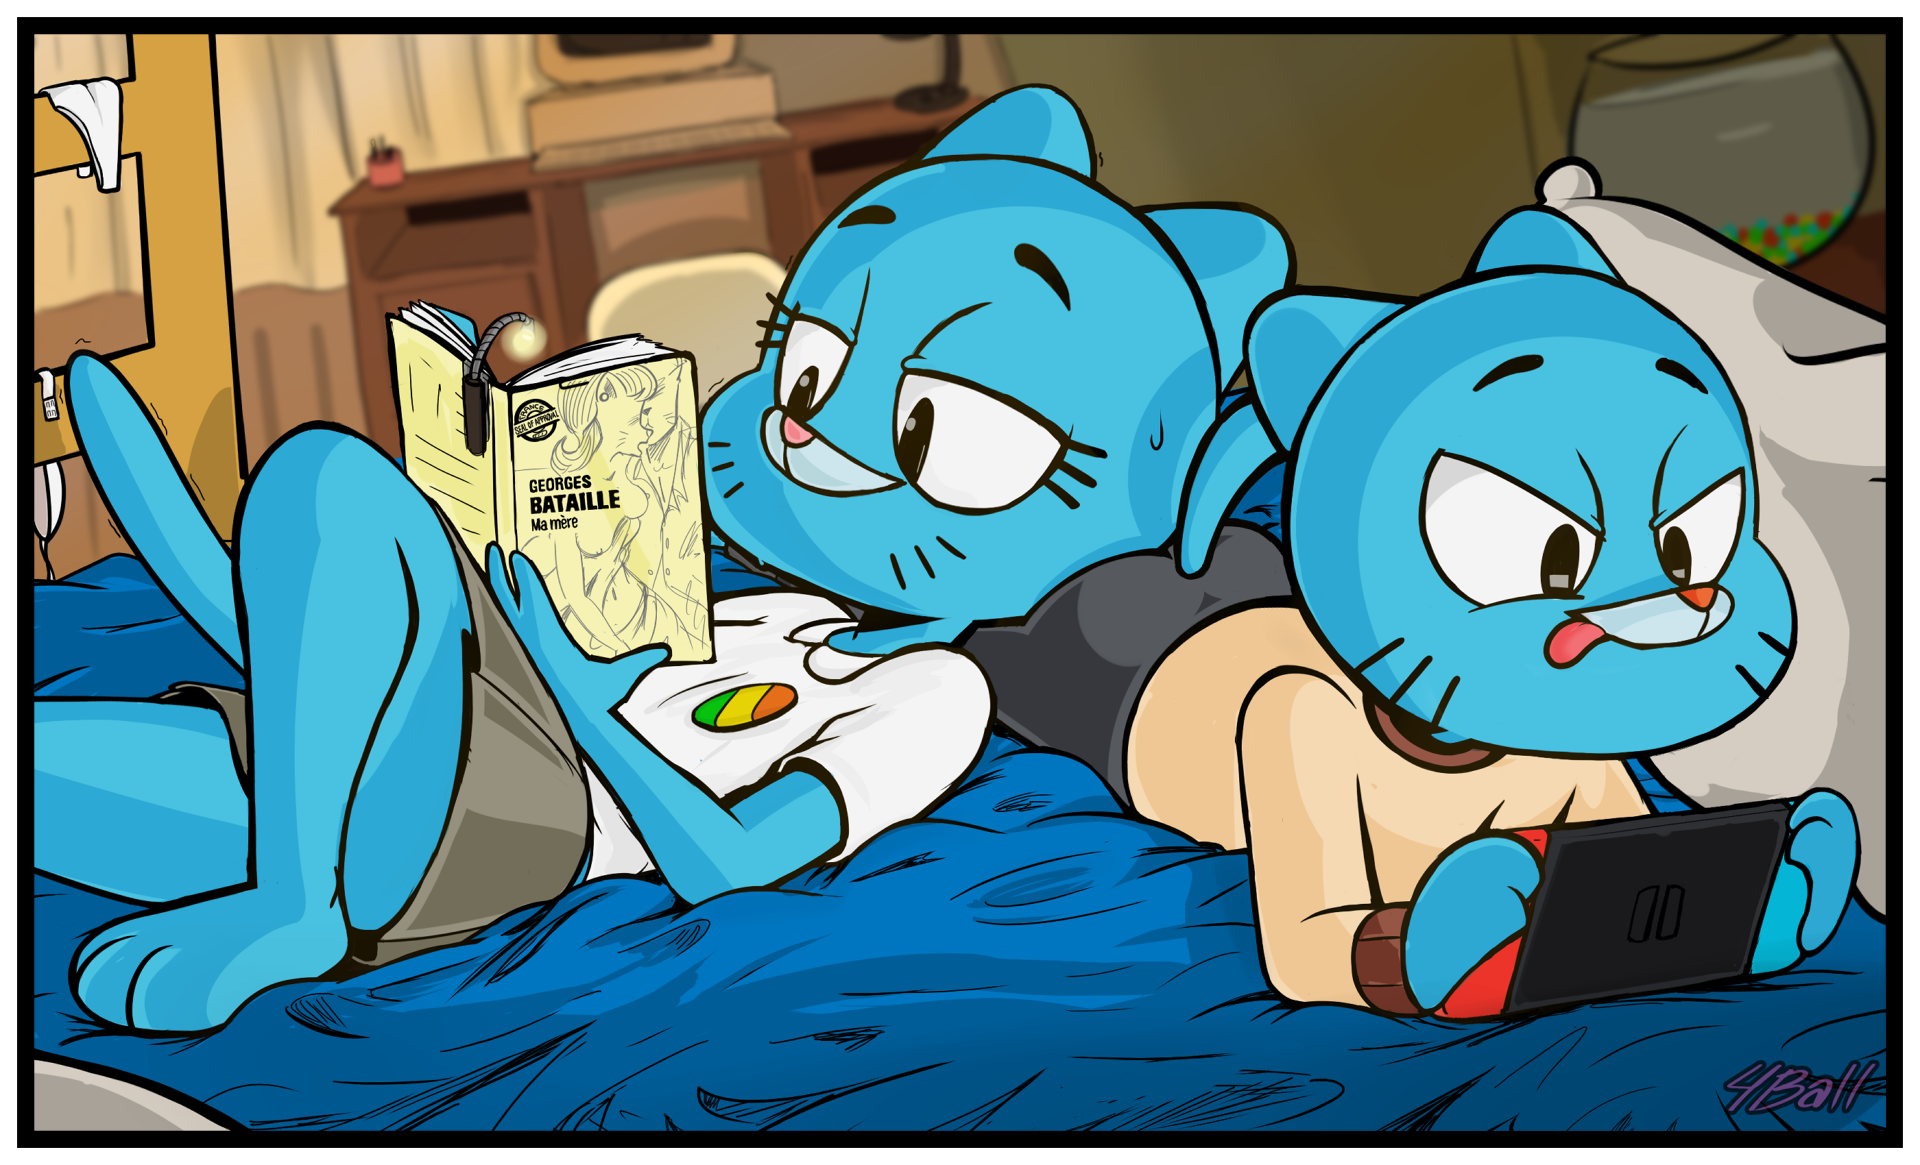 2696923_fourball_gumbal-and-nicole-chilling.png.